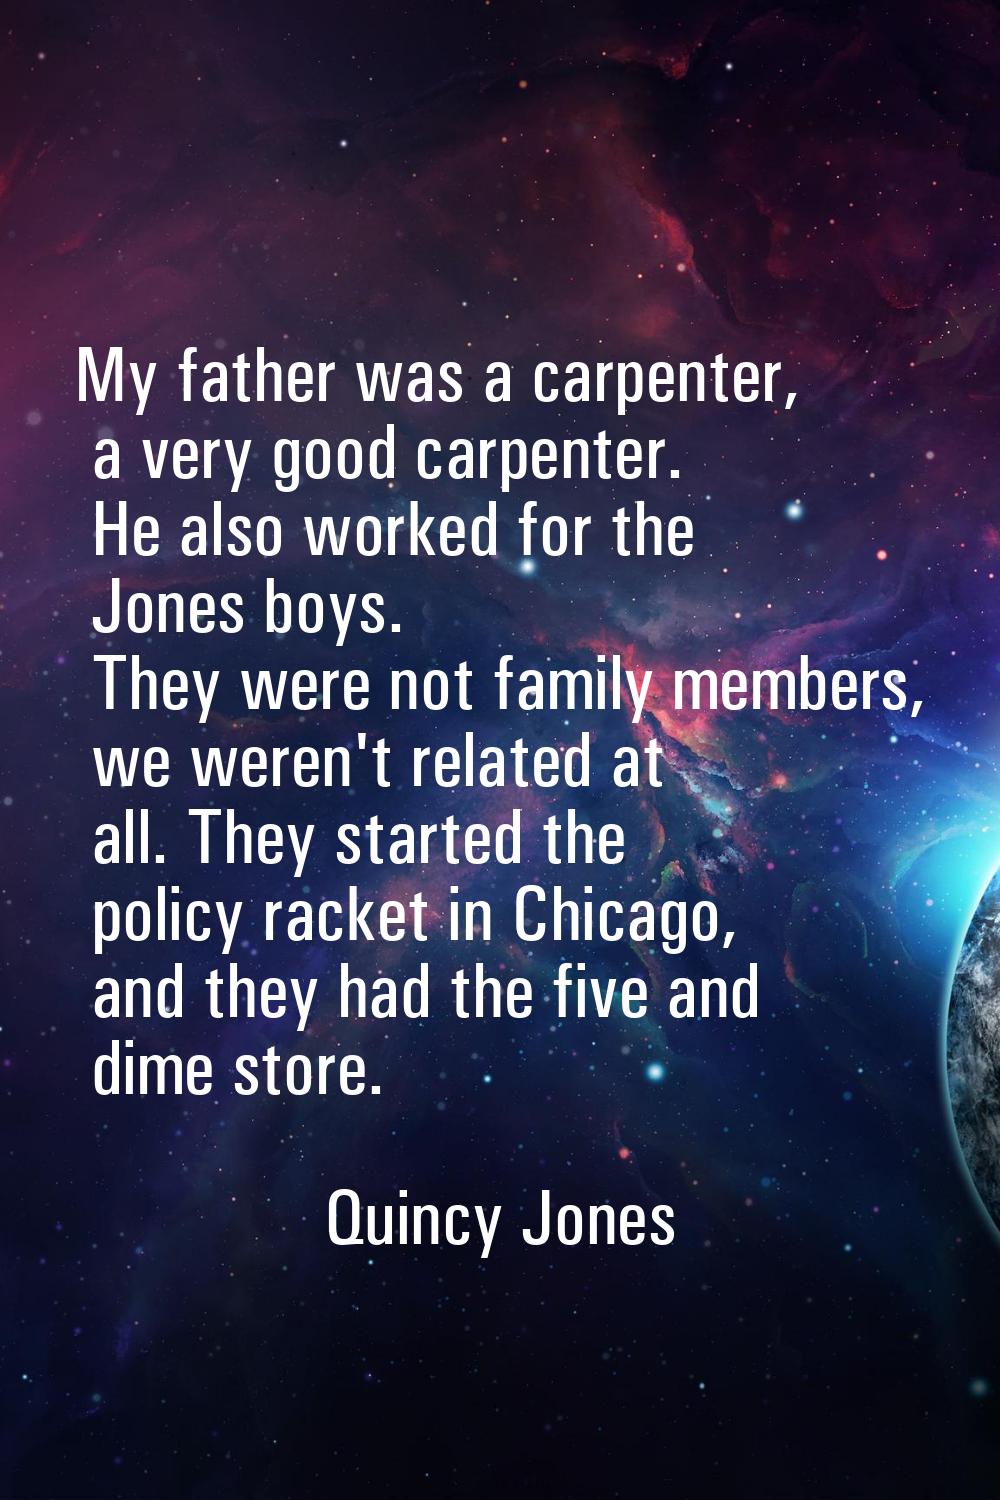 My father was a carpenter, a very good carpenter. He also worked for the Jones boys. They were not 